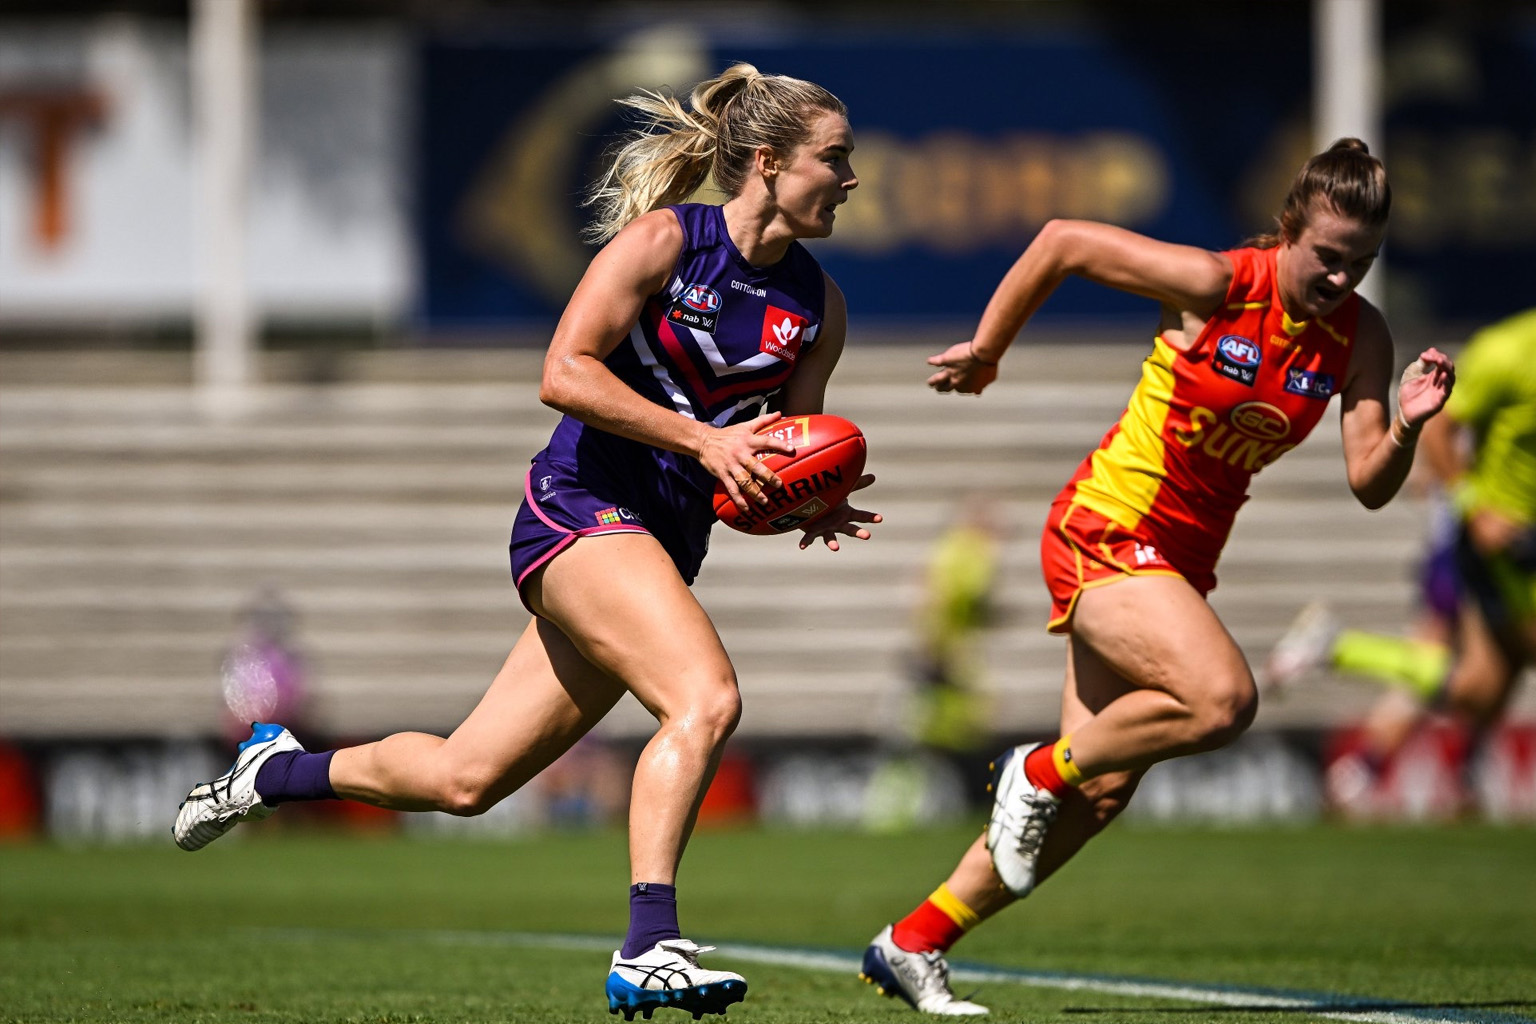 Hayley Miller playing with AFLW team Fremantle Dockers runs with the ball past a Gold Coast Suns player